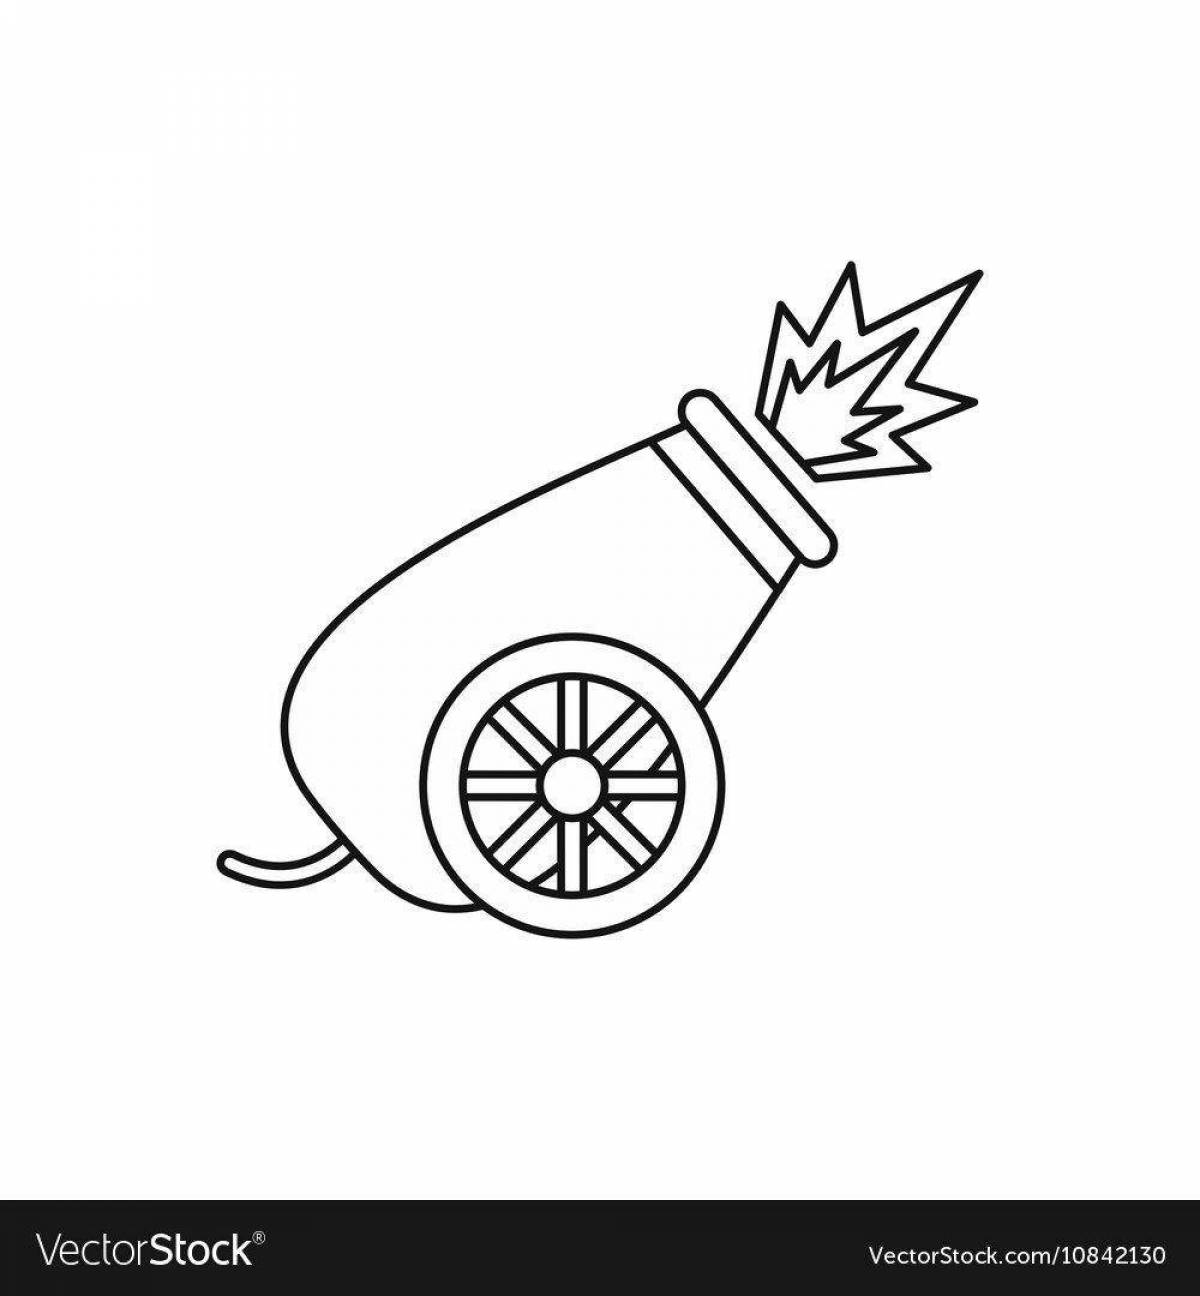 Animated king cannon coloring page for kids